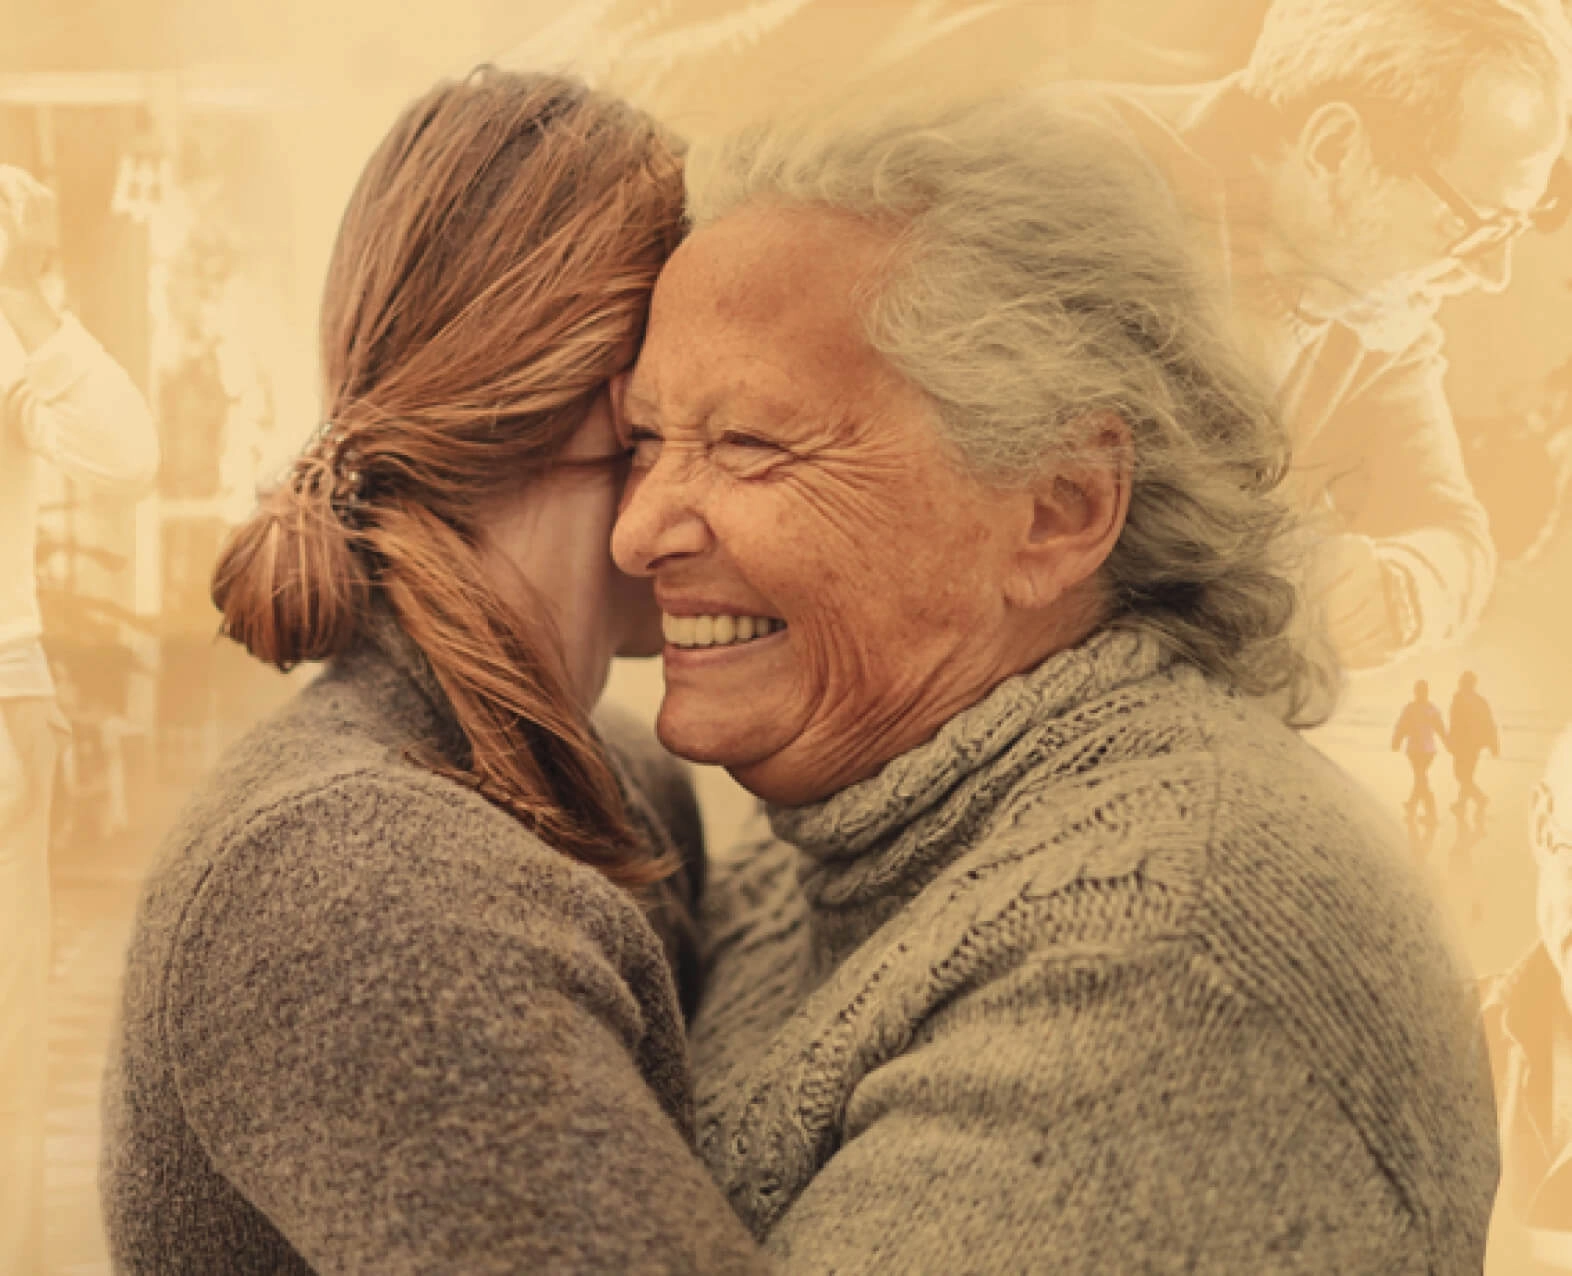 An elderly woman and a younger woman embracing and smiling warmly. (photo)